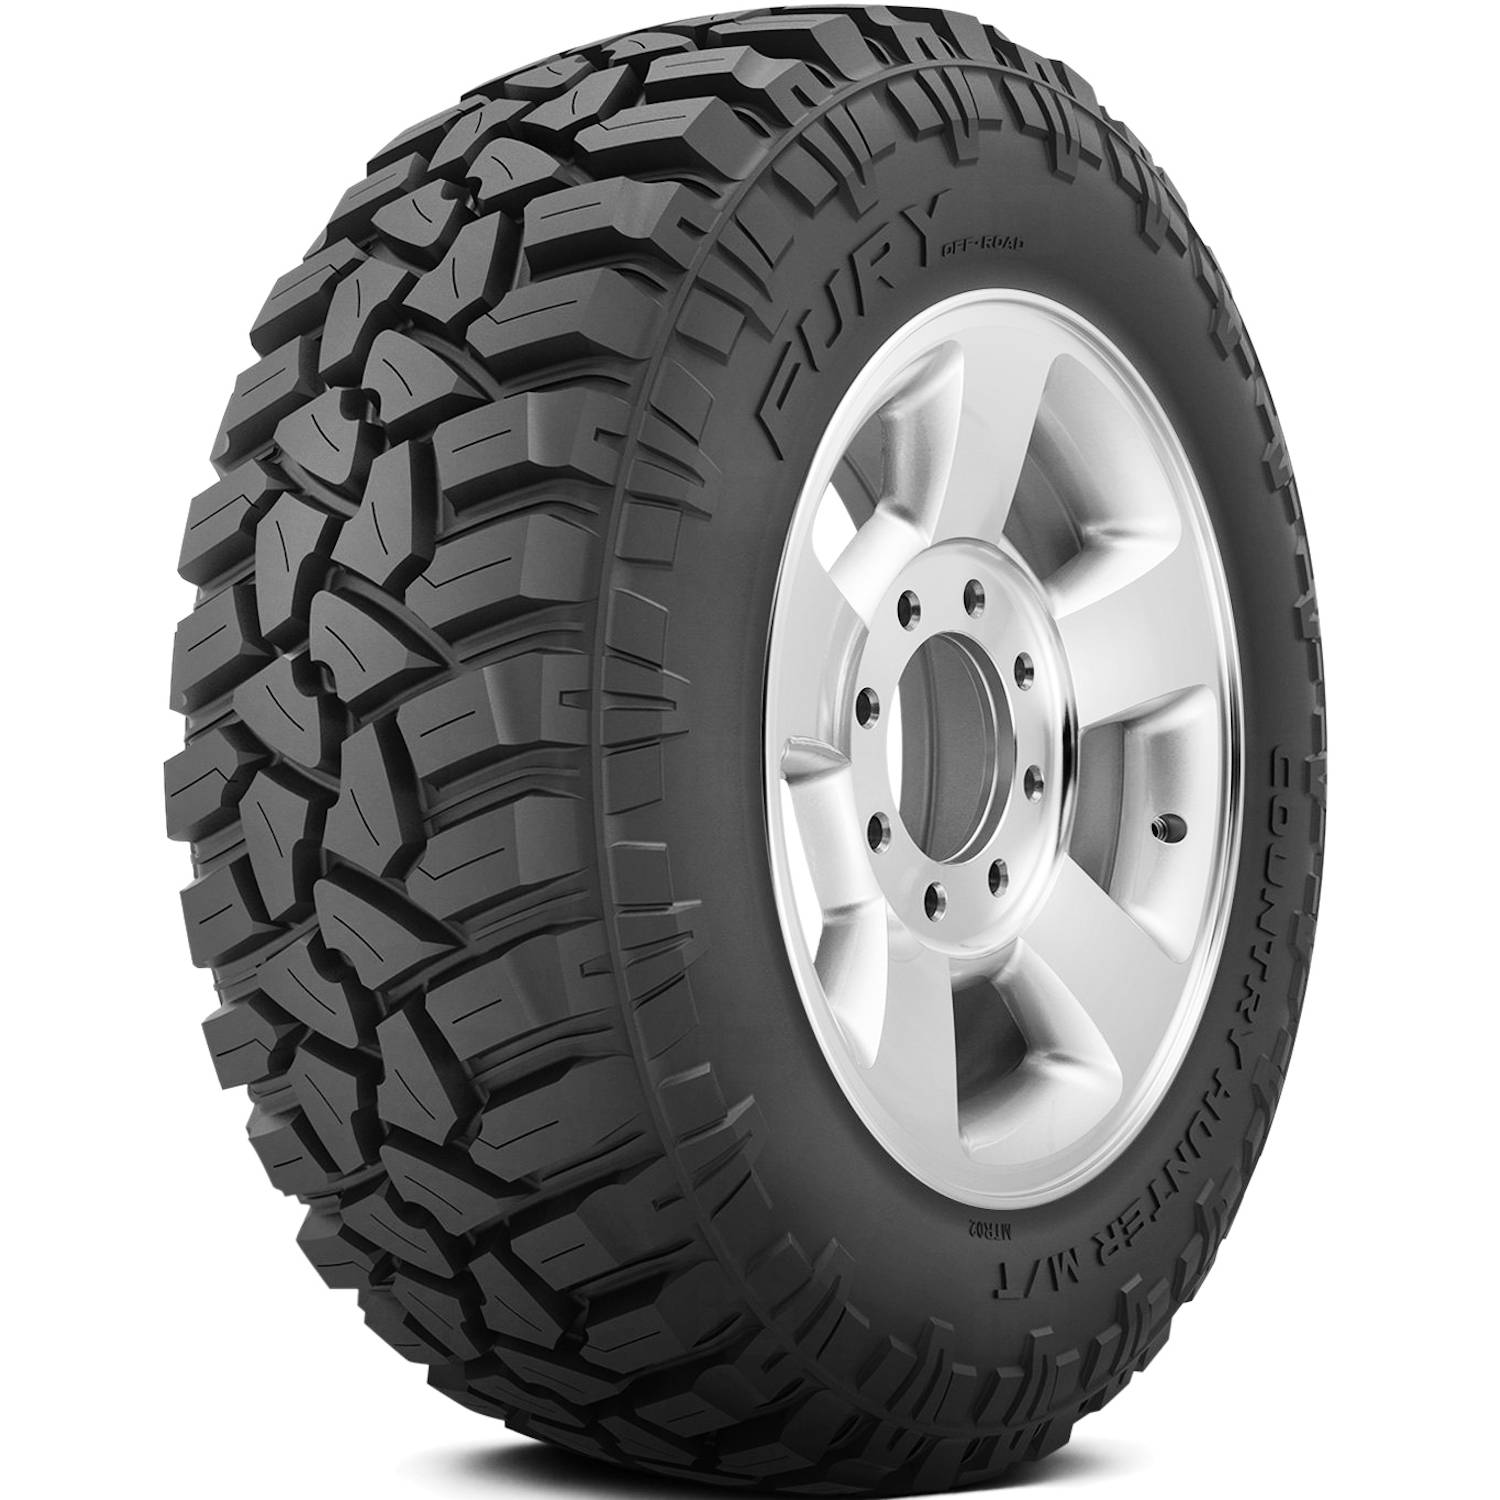 FURY OFFROAD COUNTRY HUNTER MTII 33X12.50R20LT Tires